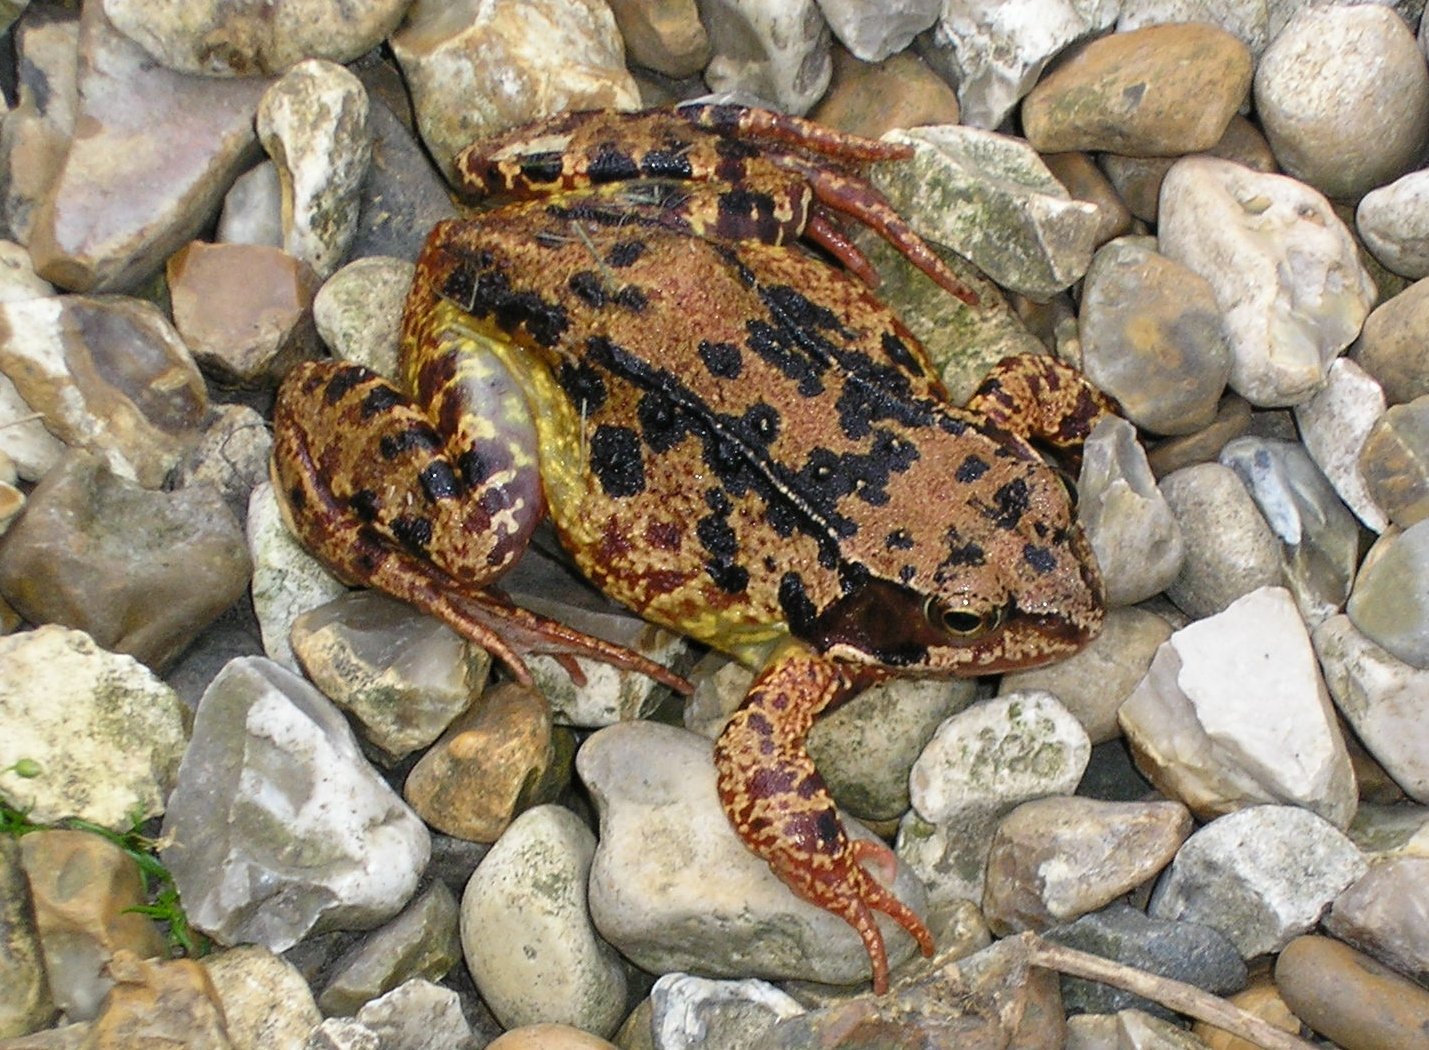 Common frog on pebbles